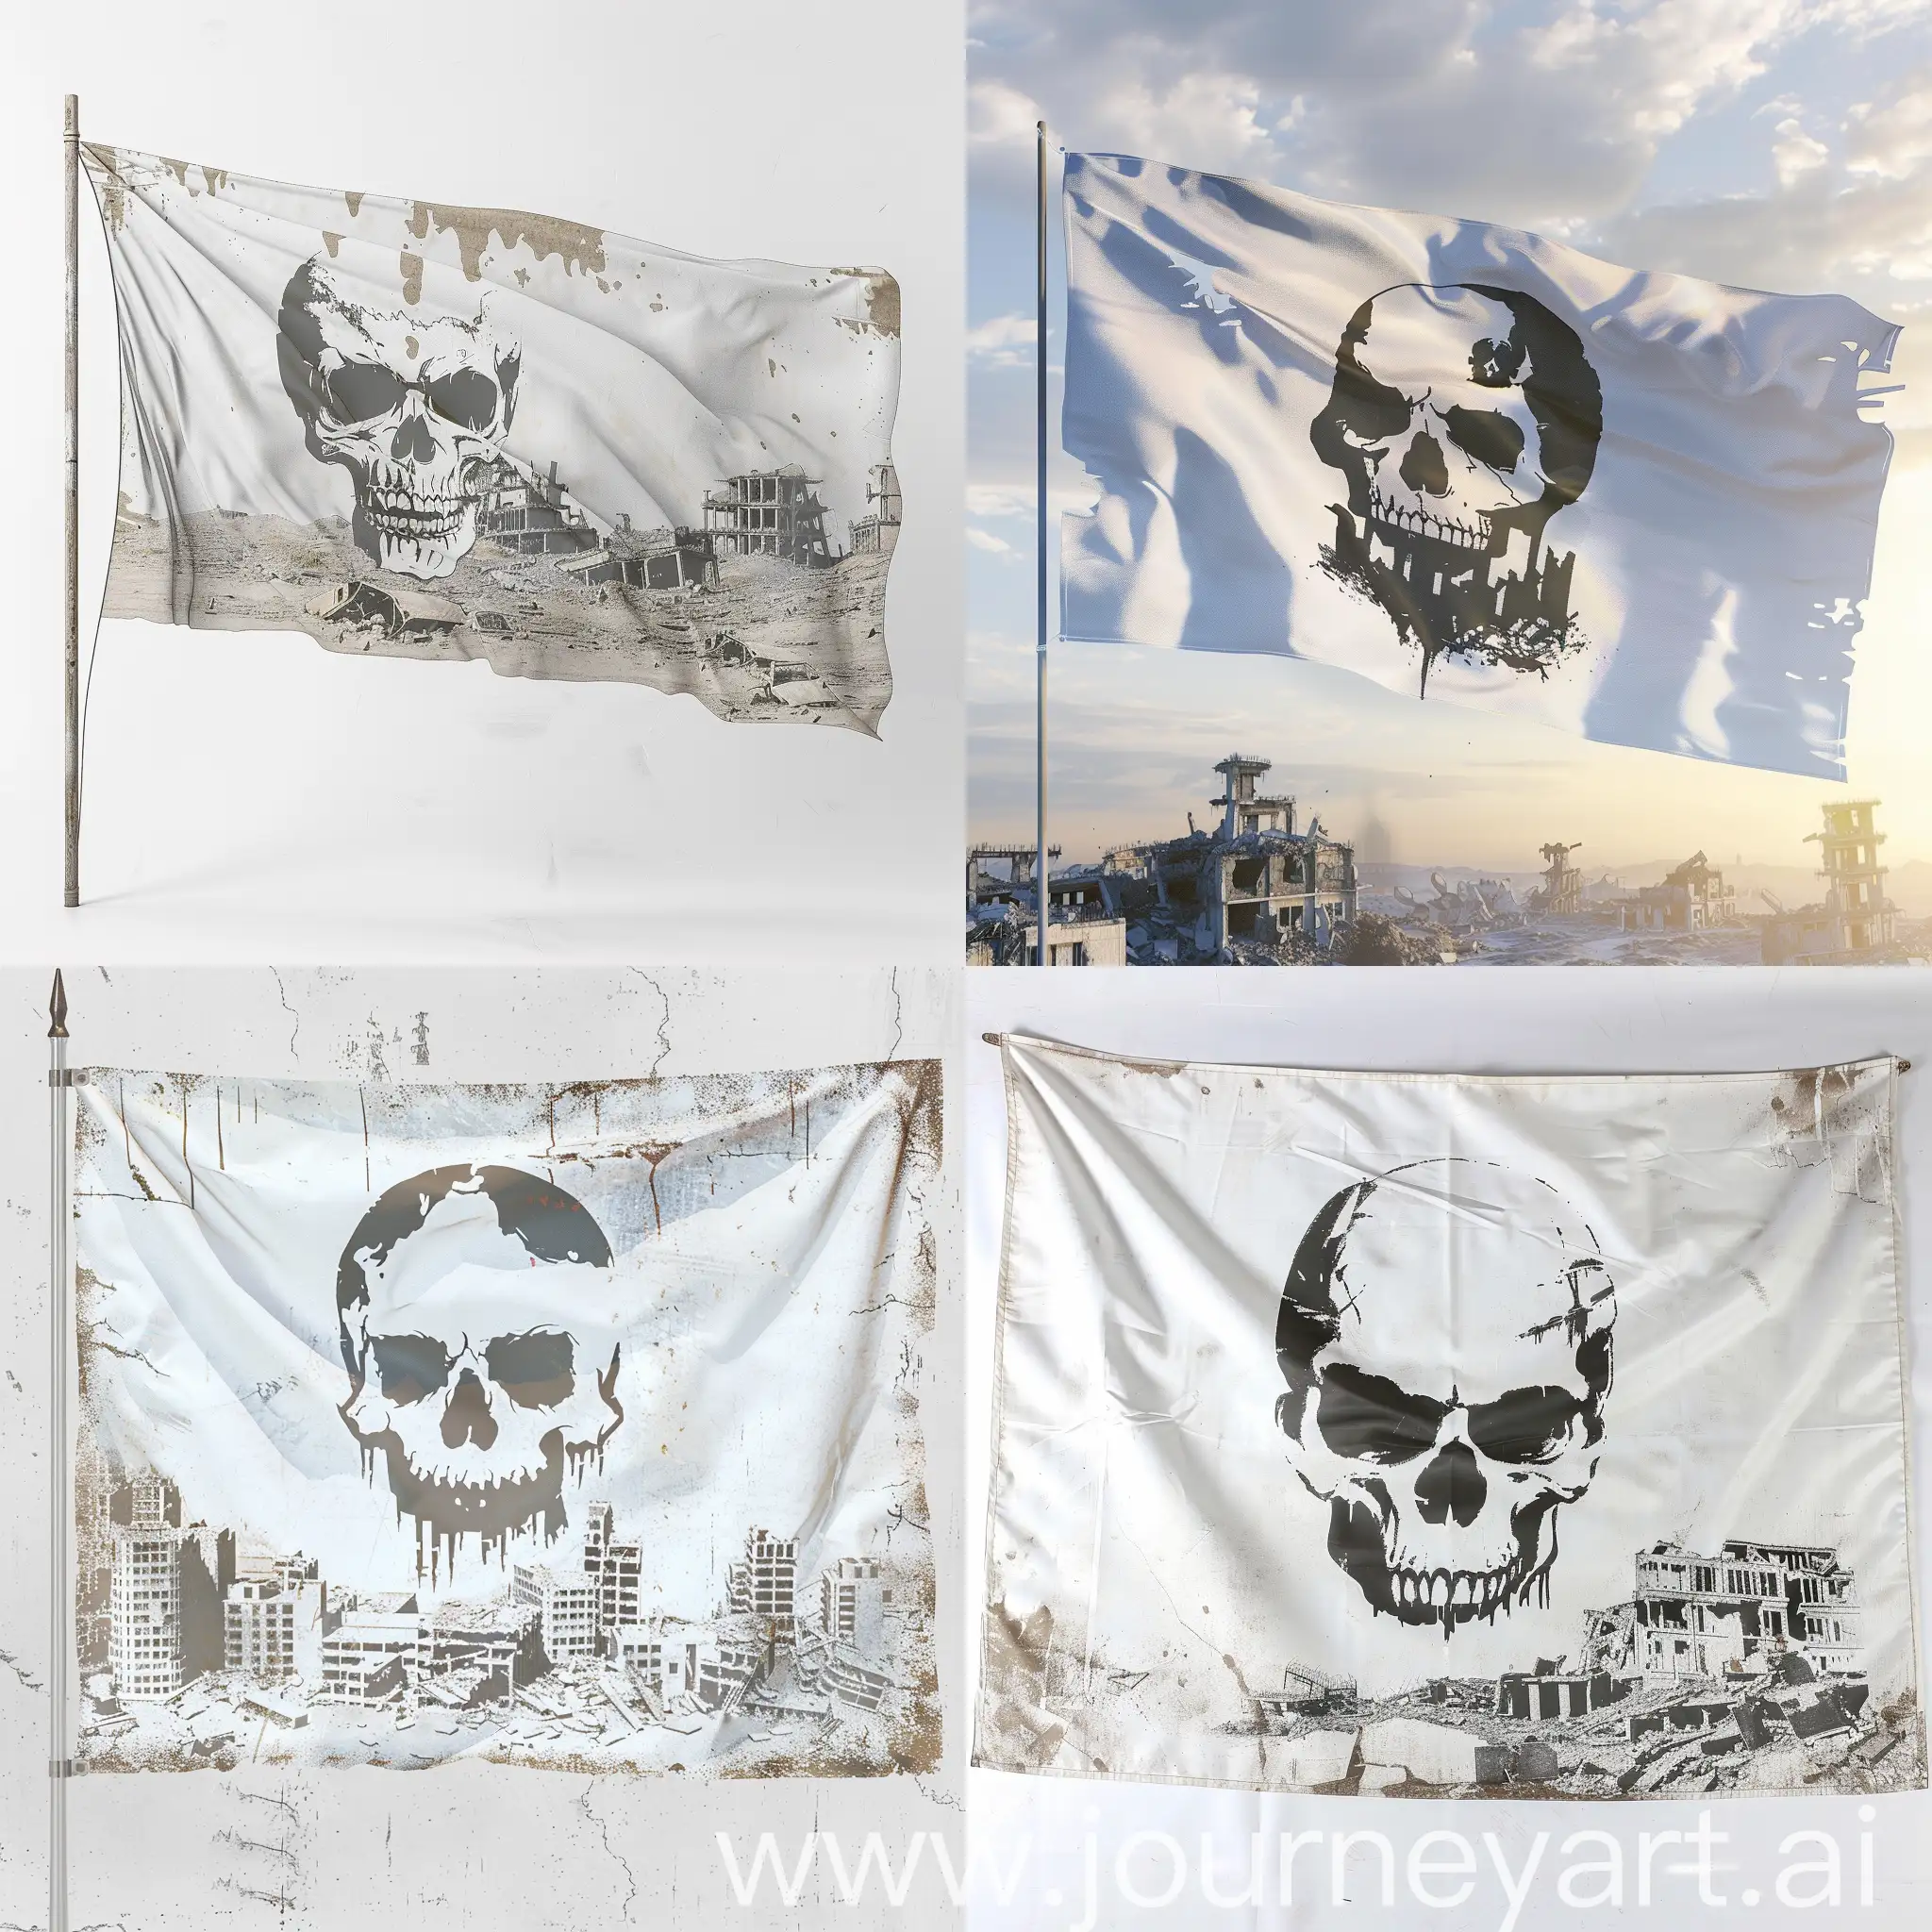 generate flag with a white skull on a white background with a destroyed city, the flag similar to the flag of PMCs WAGNER or BlackWater